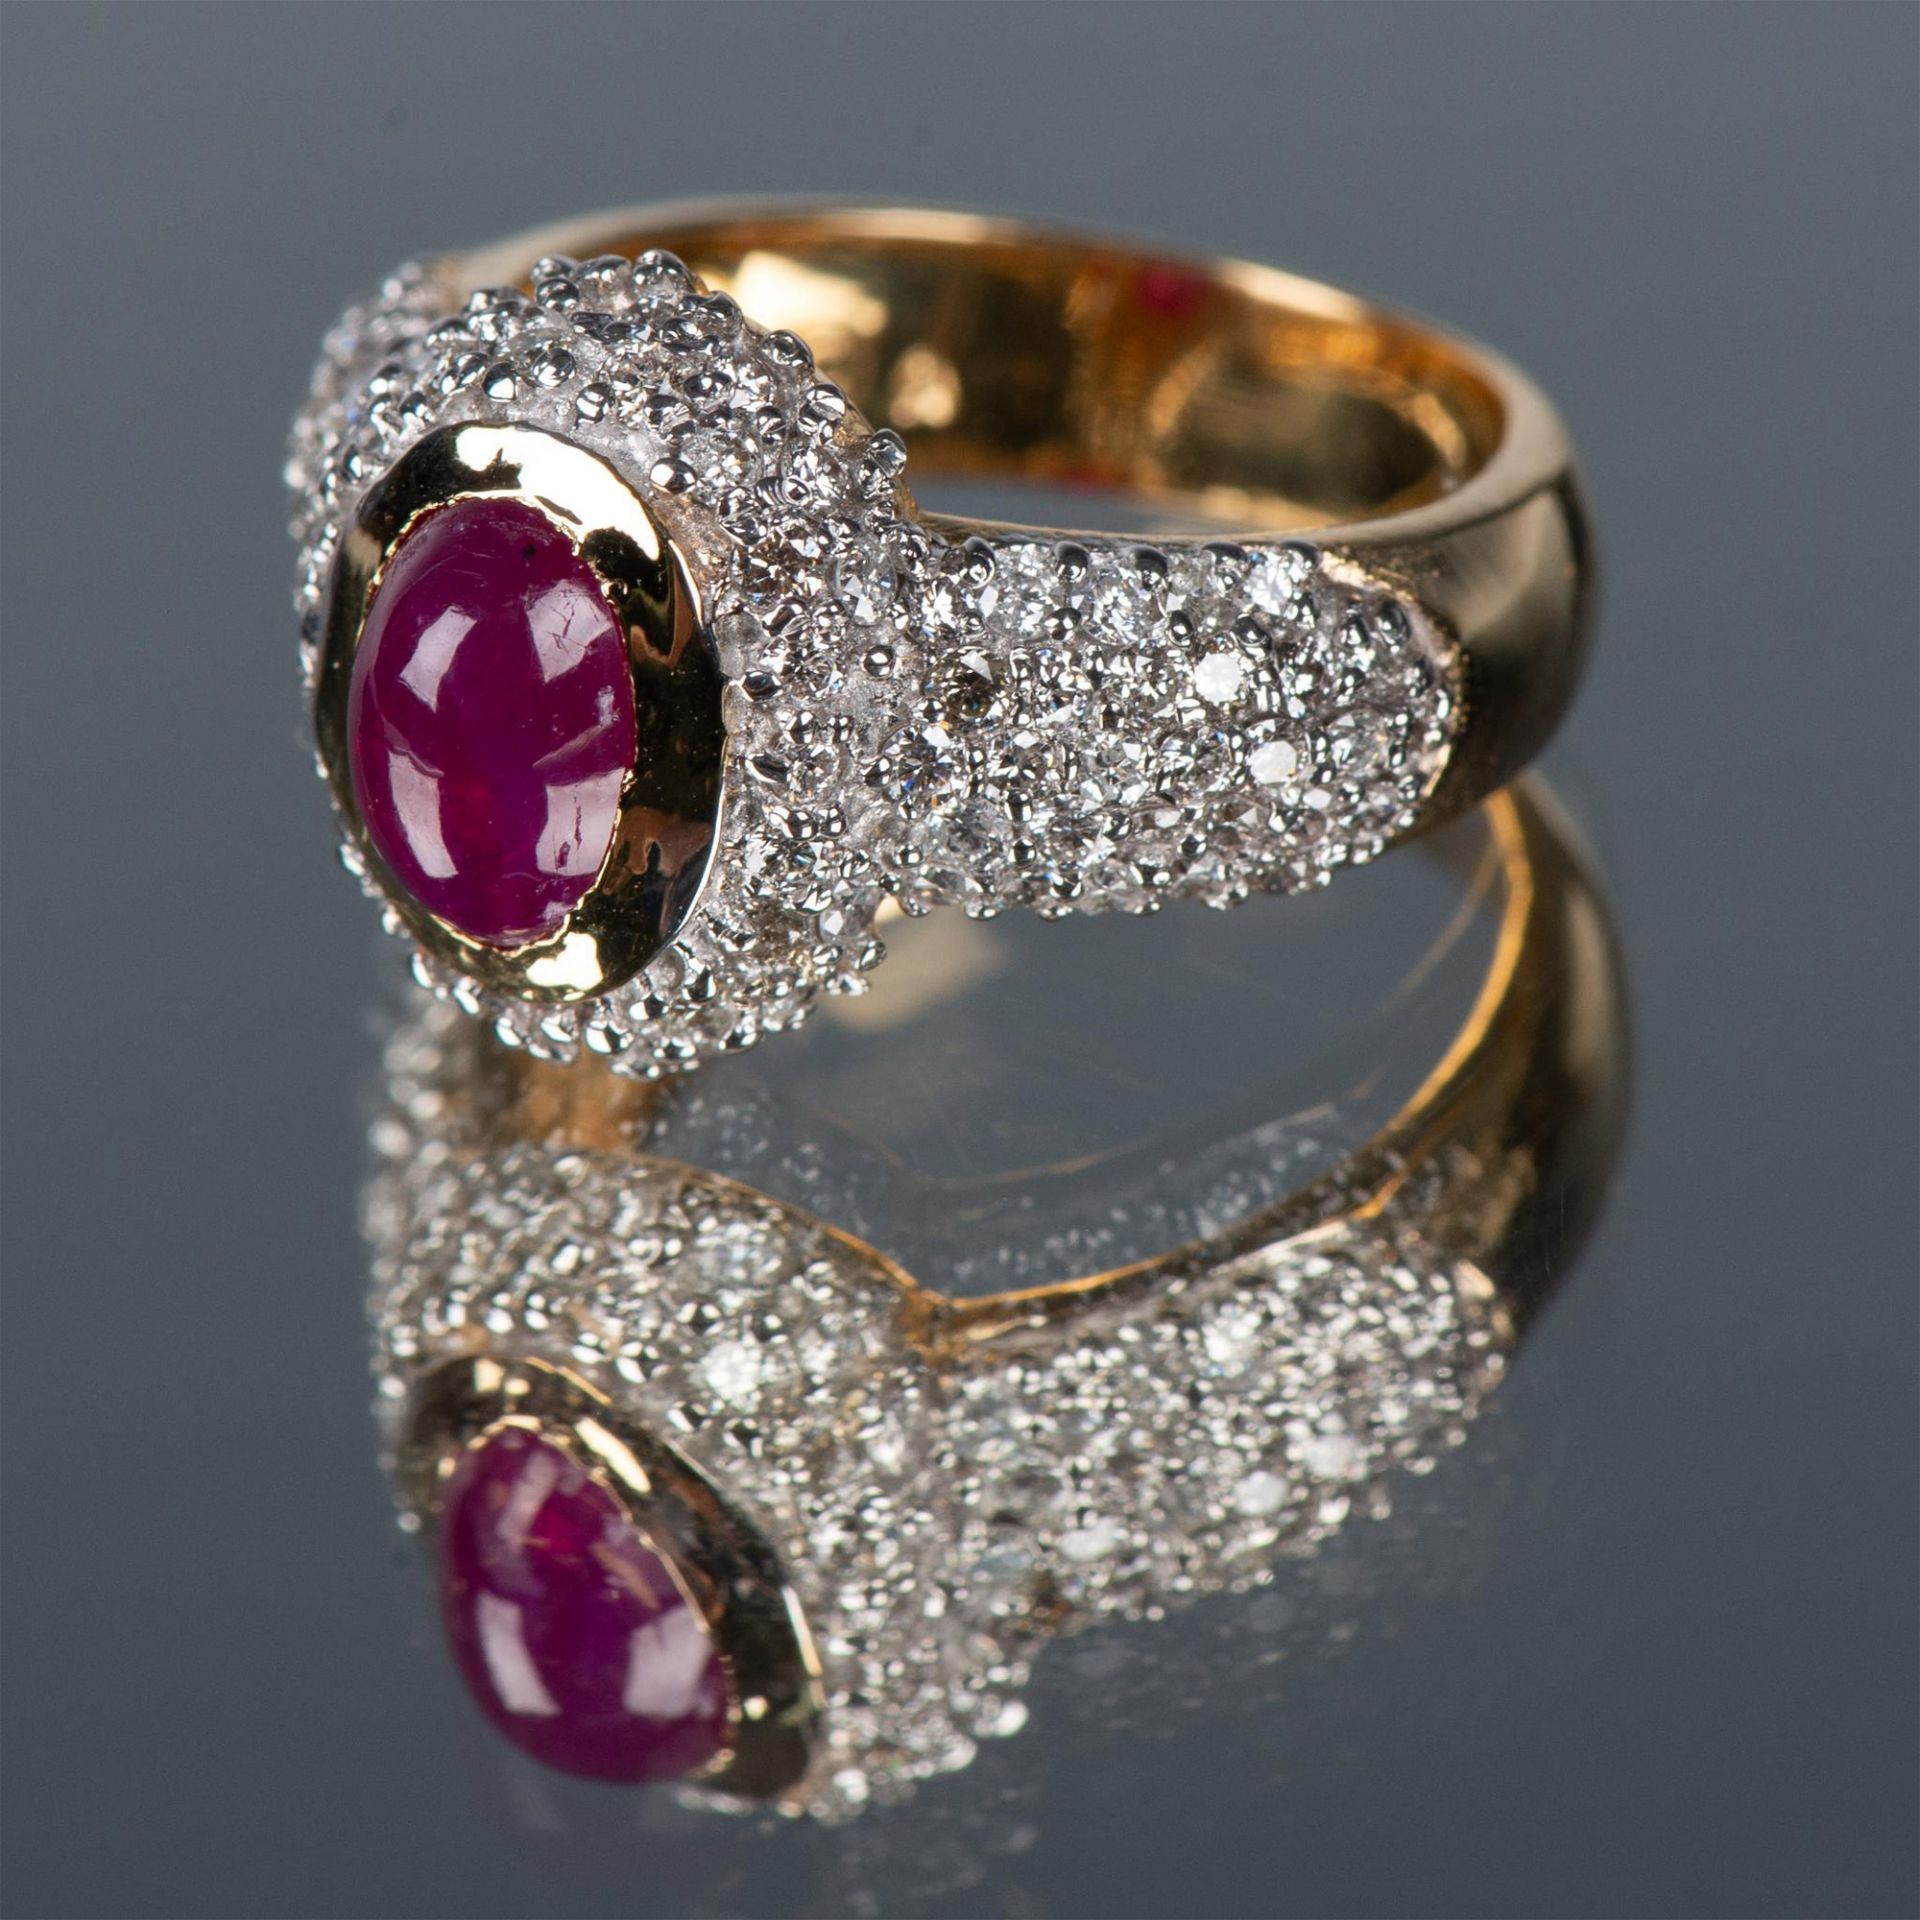 Fabulous 14K Yellow Gold, Diamond, and Ruby 2.9ctw Ring - Image 2 of 11